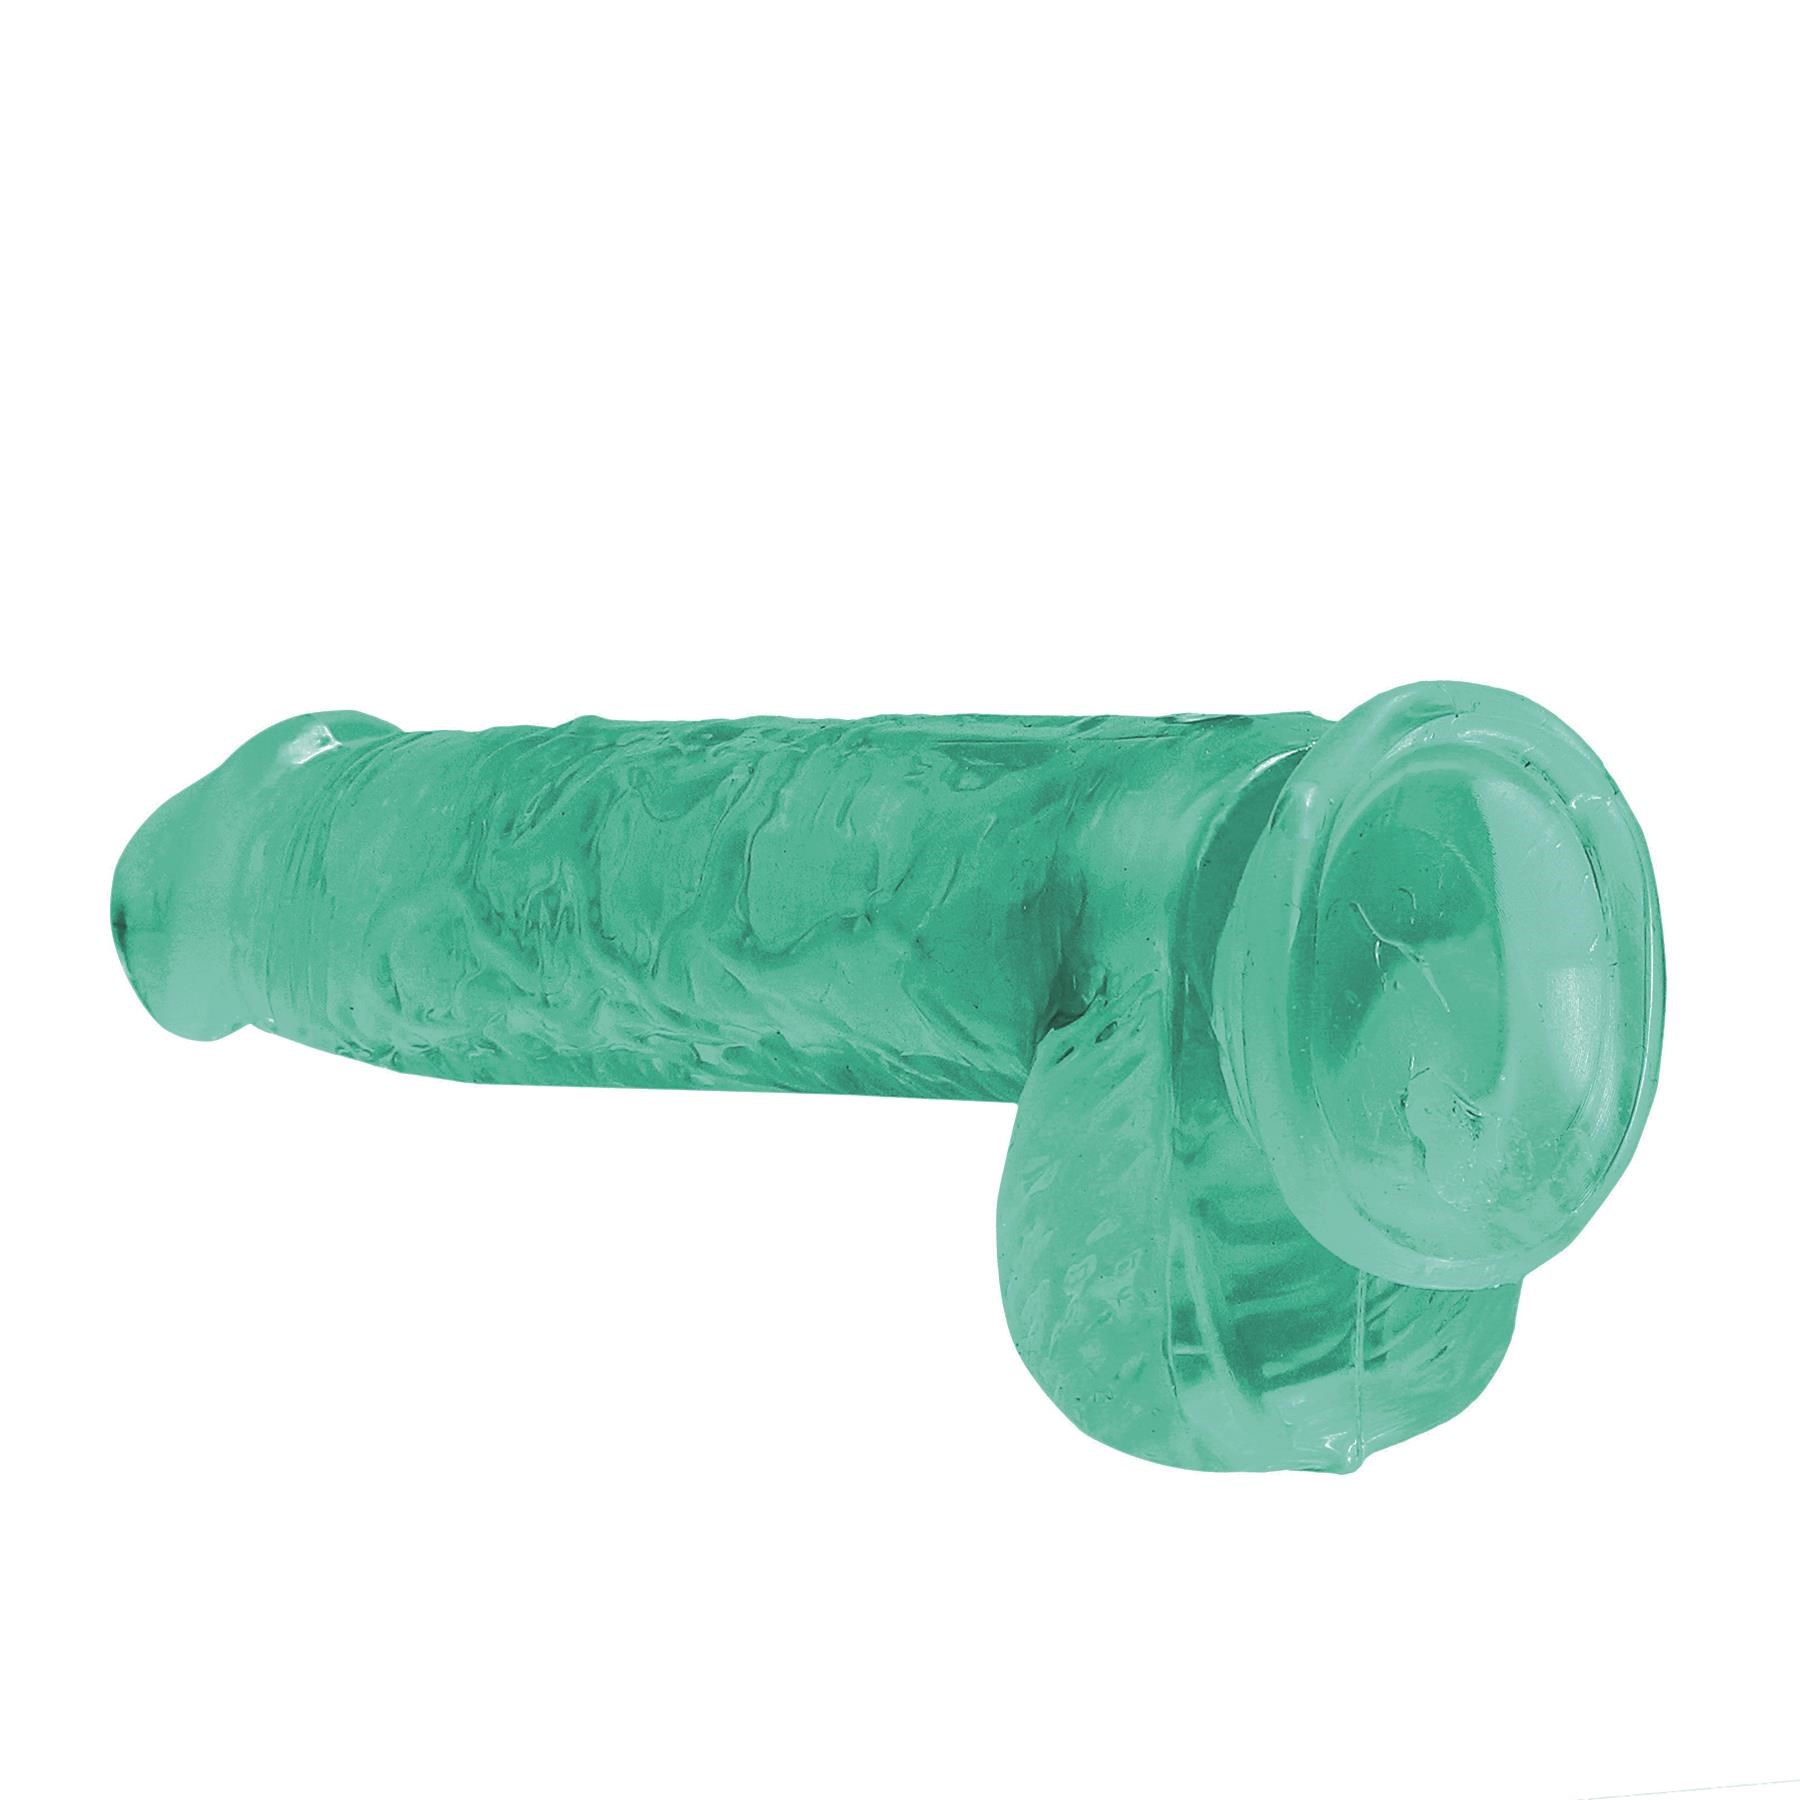 Realrock Realistic Dildo With Balls - 6 Inch - Product Shot Showing Suction Cup